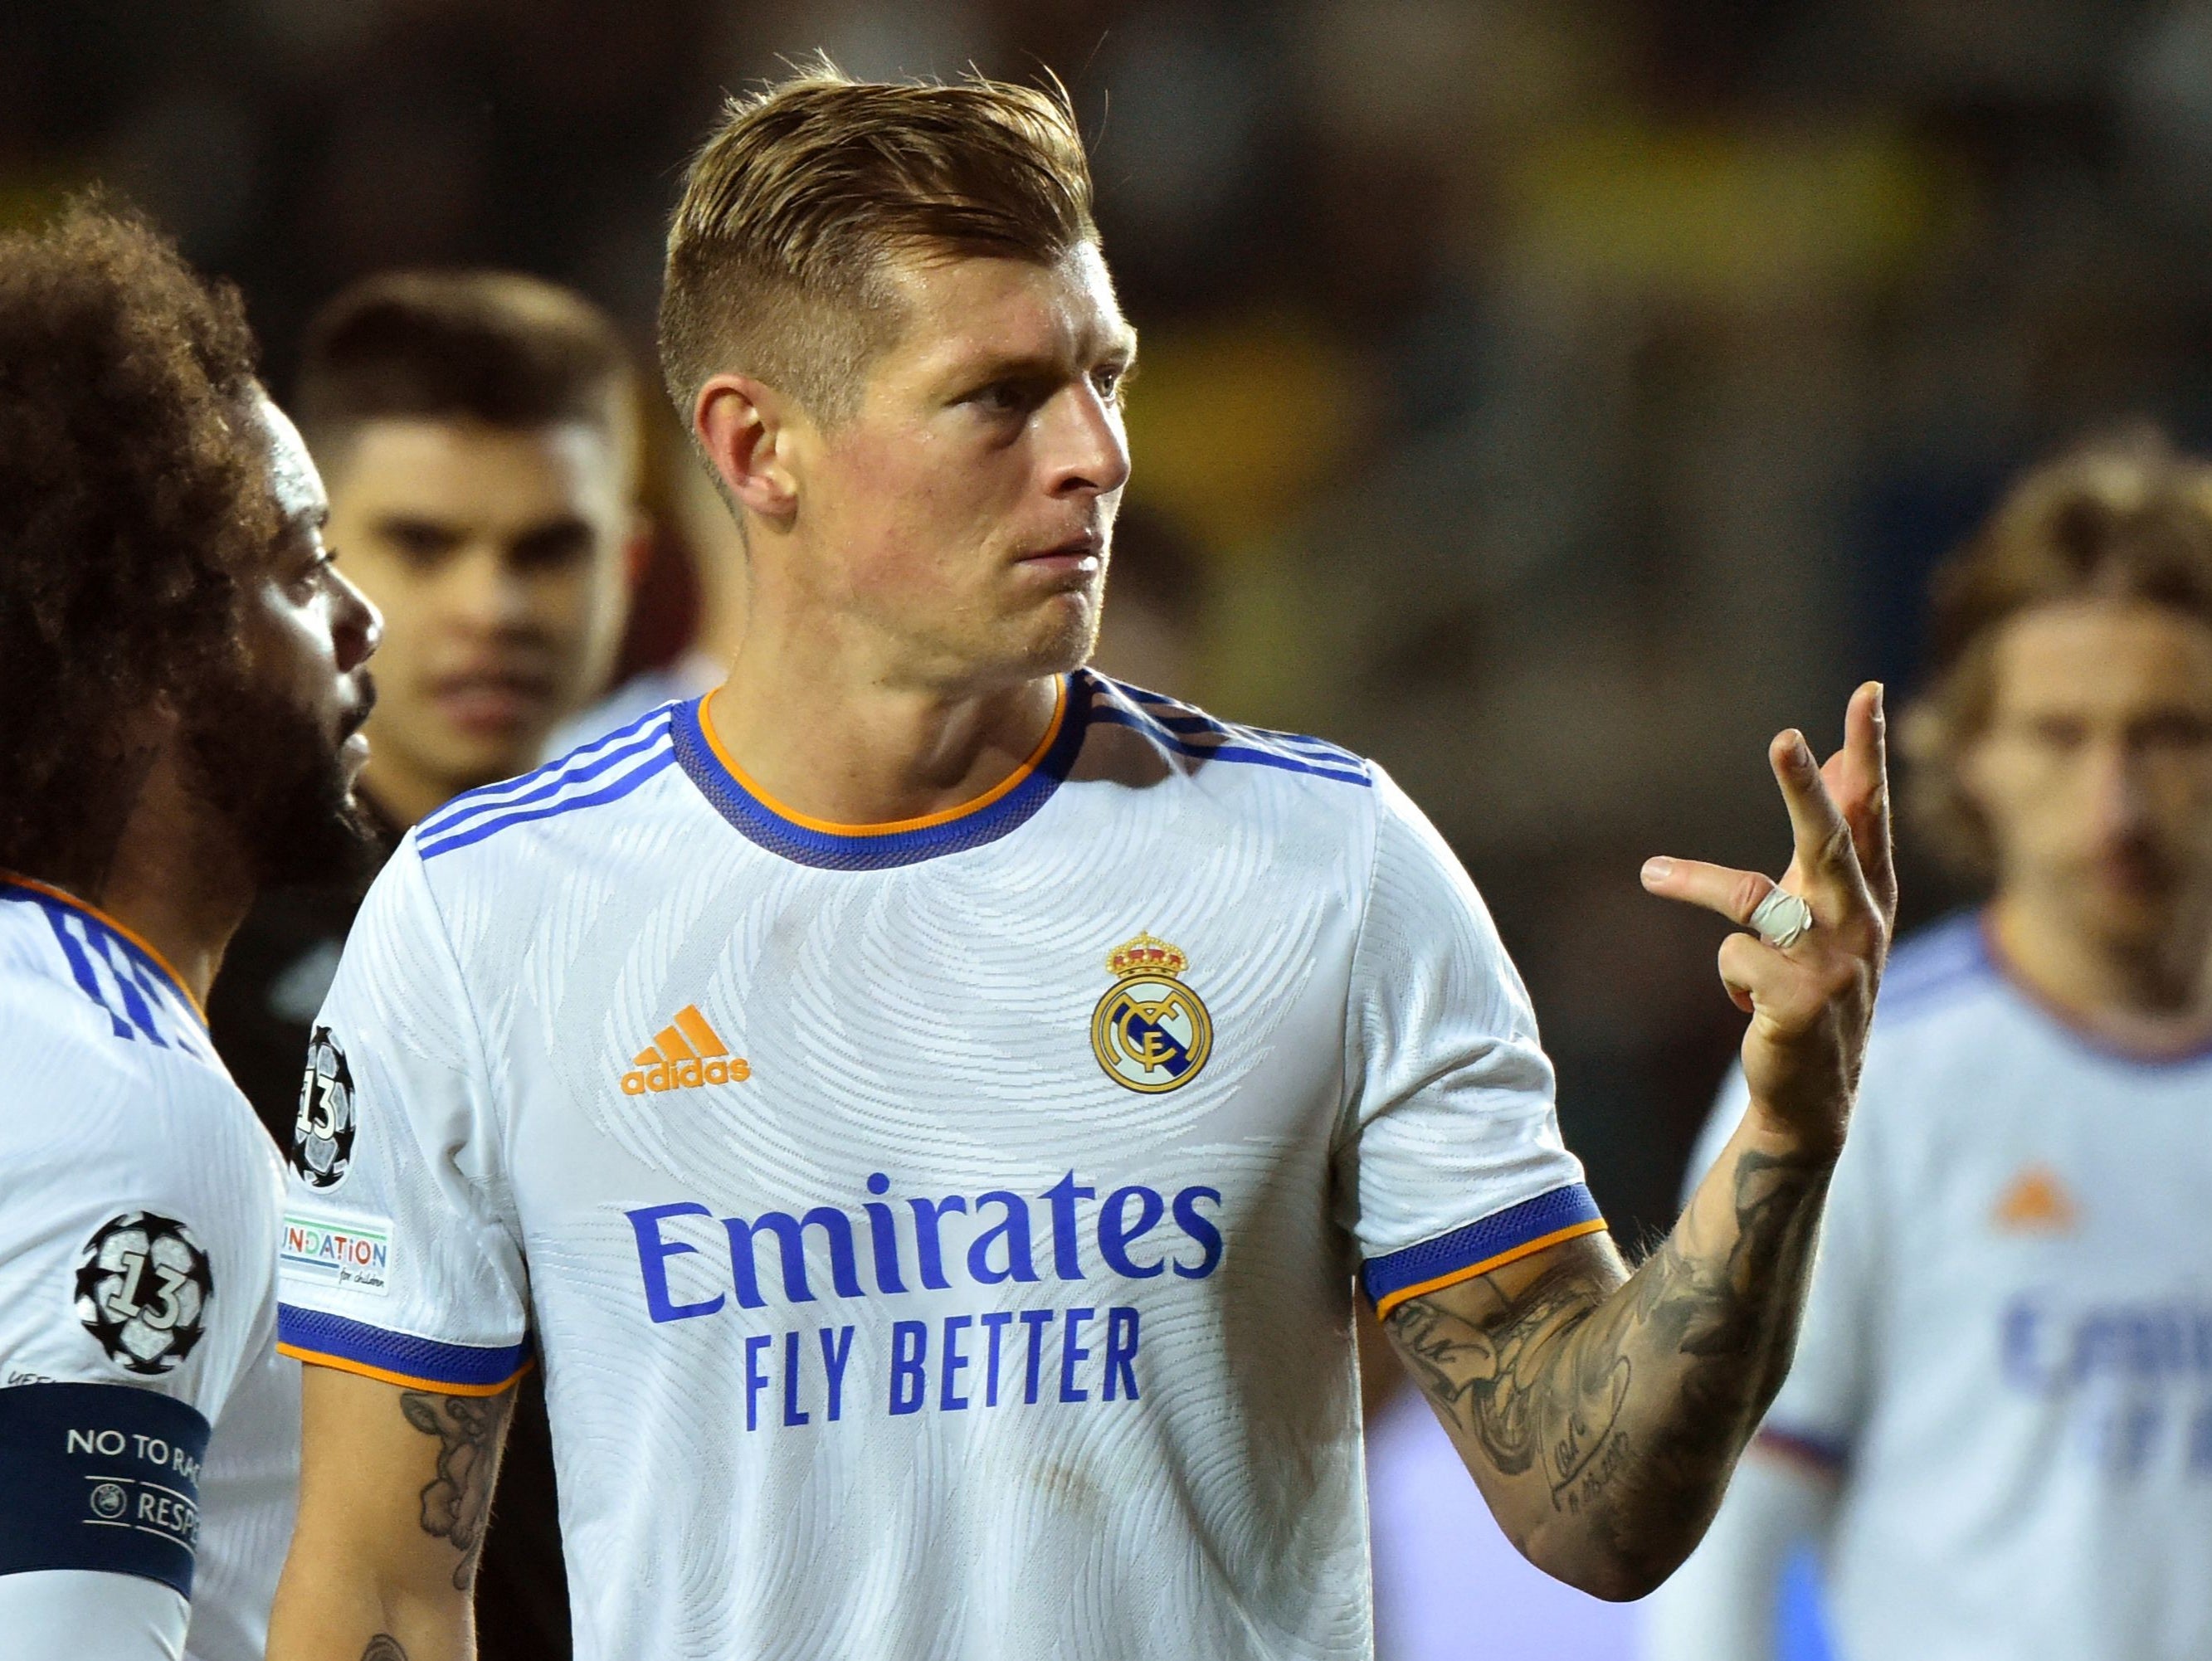 Toni Kroos stunned by yellow card for 'tackle' on player he didn't touch - The Independent